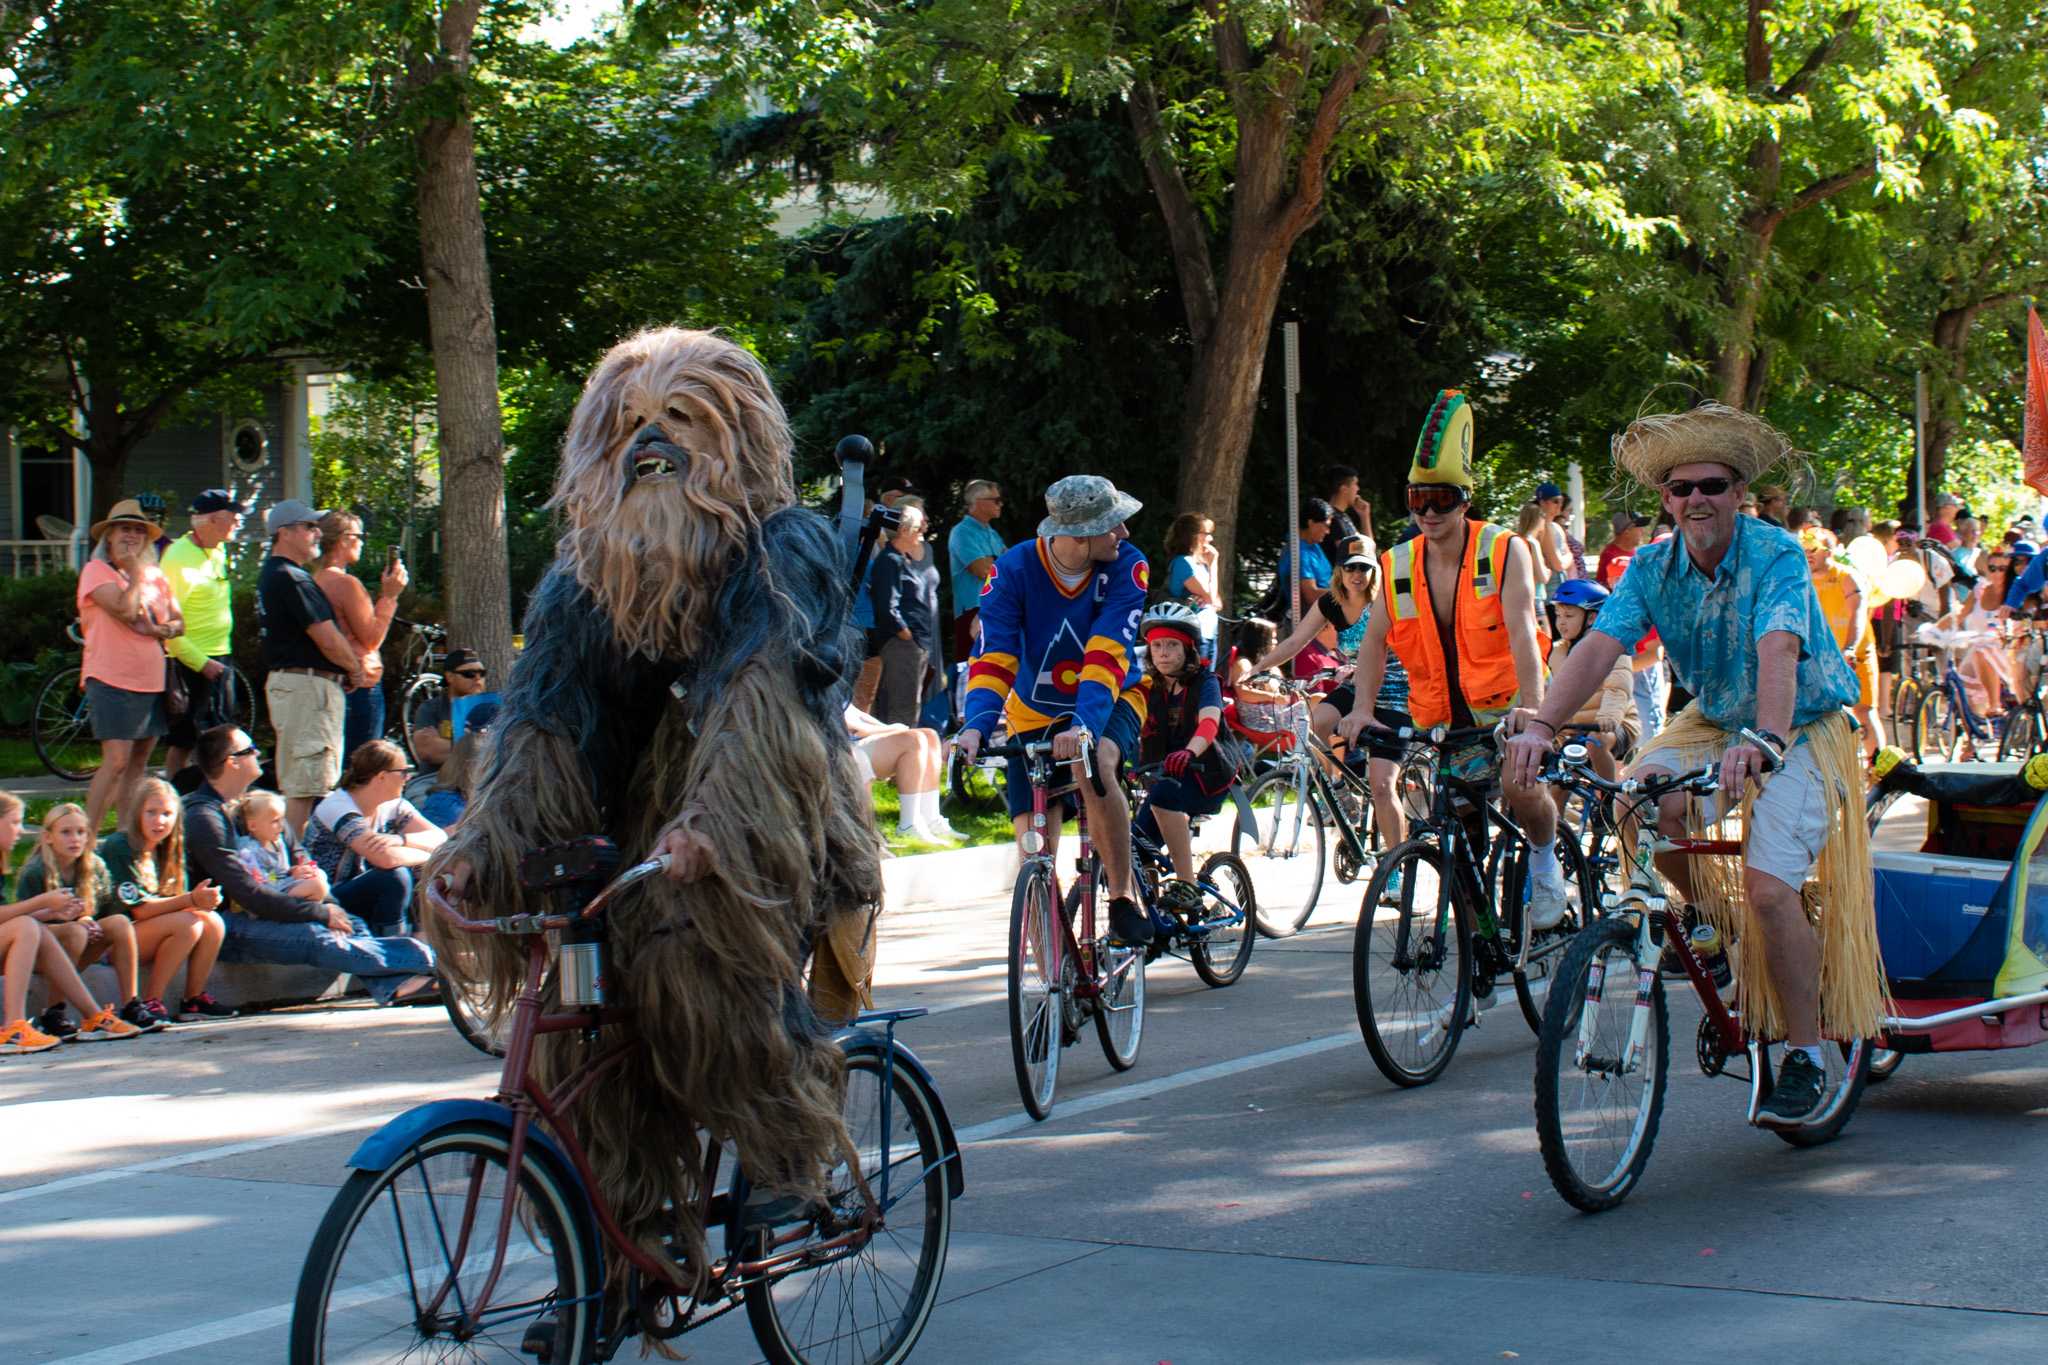 Fort+Collins+residents+participated+in+the+annual+city-wide+party+known+as+Tour+de+Fat.+Beer+and+bikes+are+at+the+forefront%2C+and+over-the-top+costumes+are+highly+encouraged.